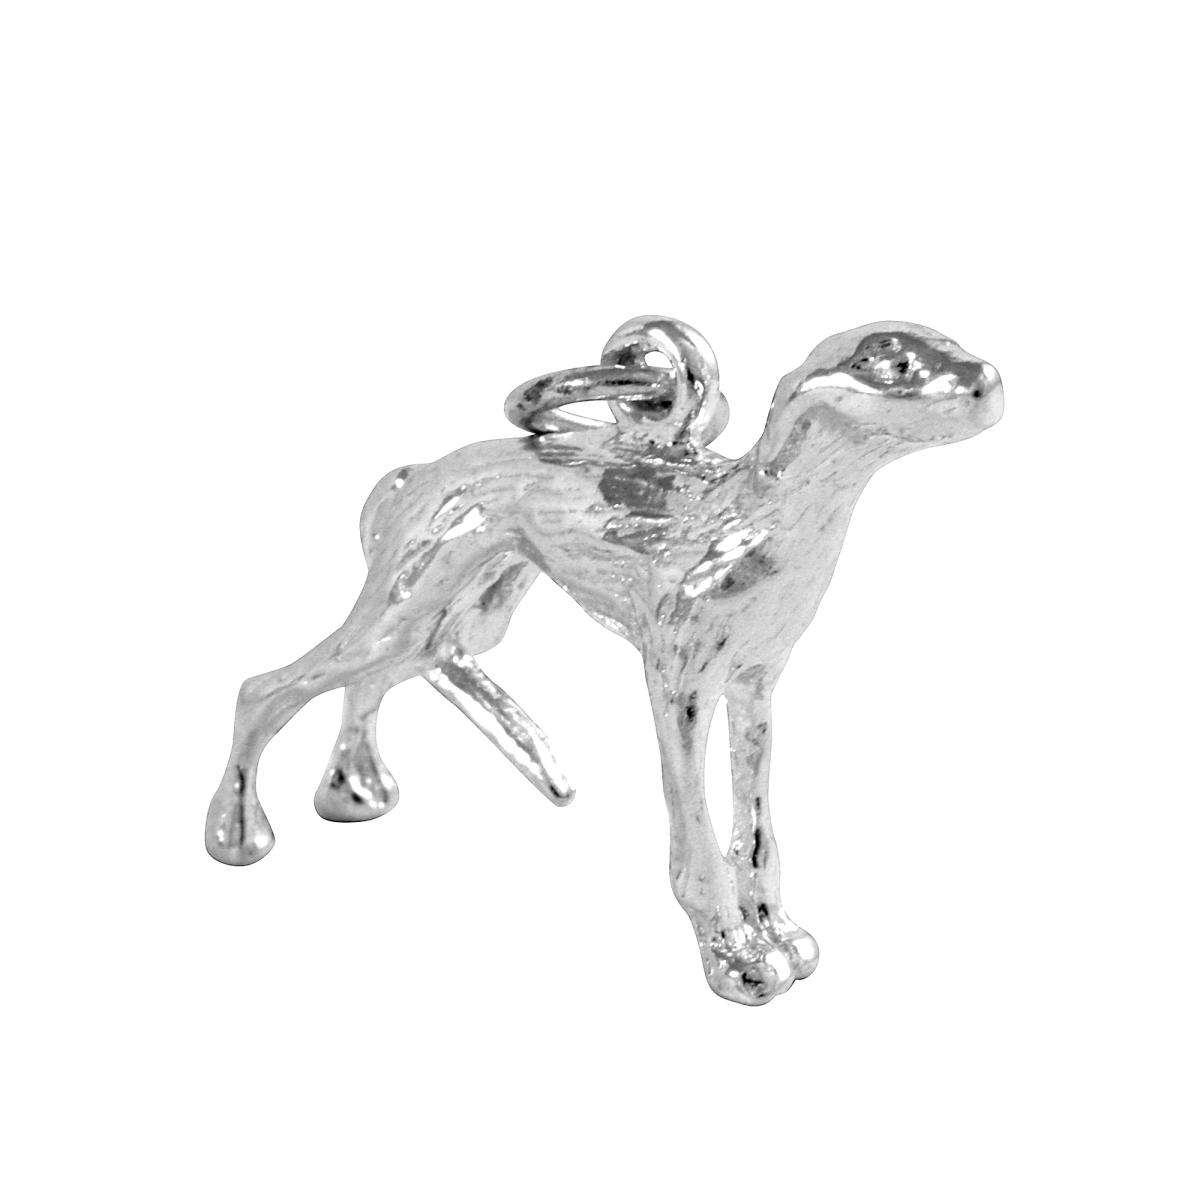 Online Sale 925 Silver Charm Suppliers |Suppliers Whippet Charm|